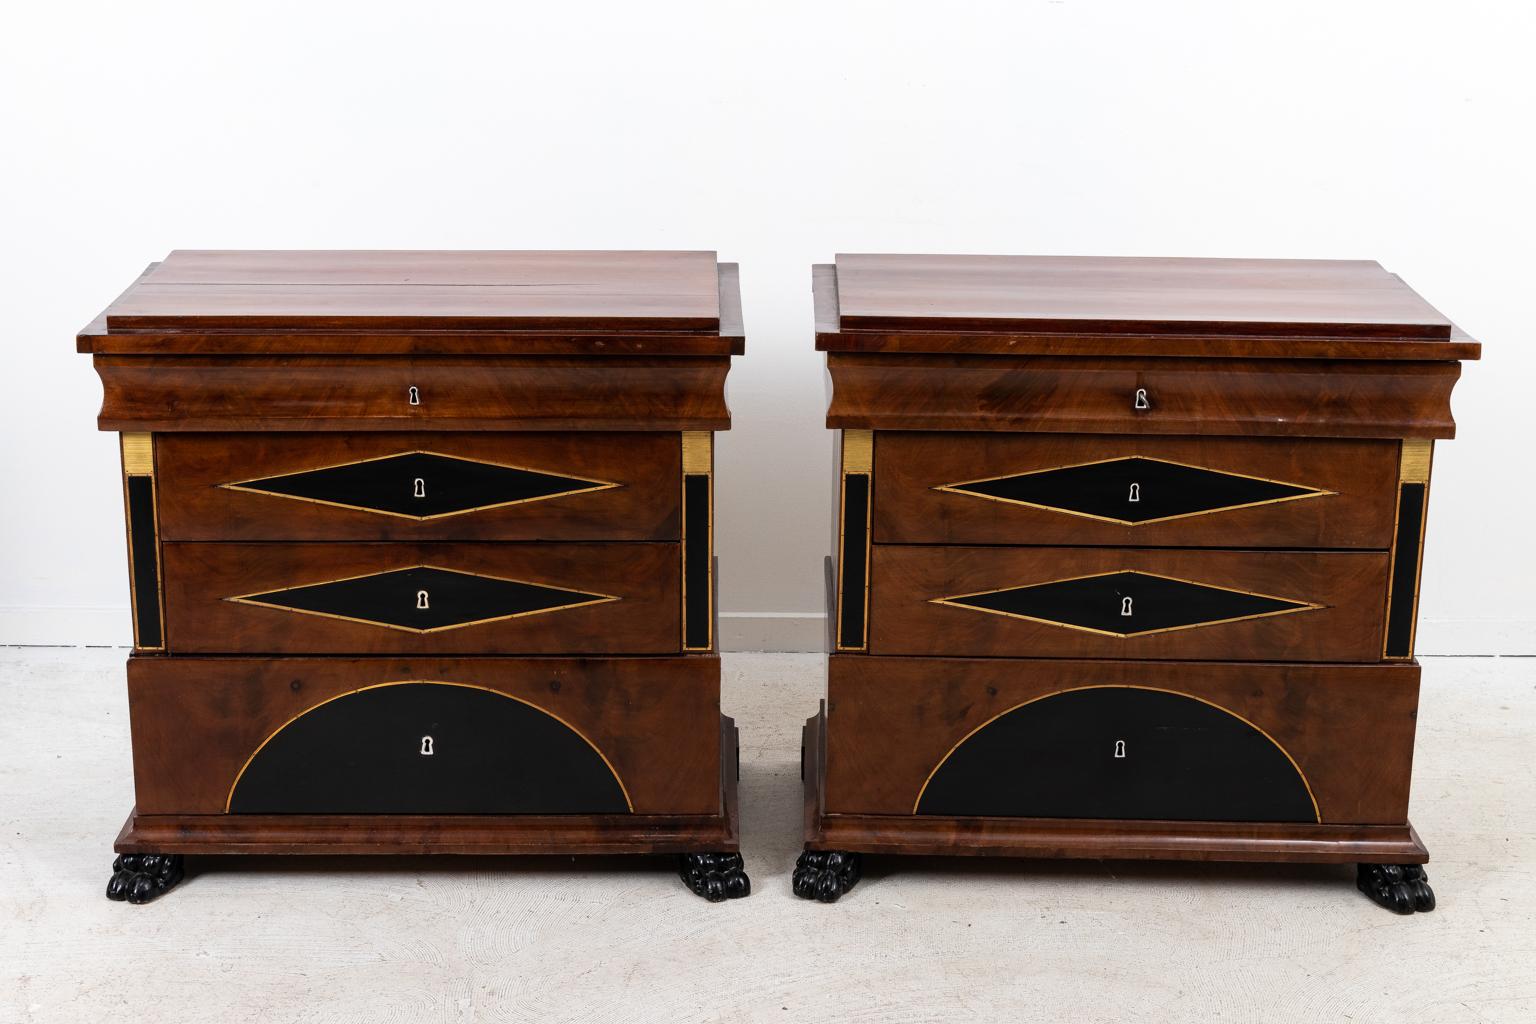 Pair of Biedermeier chests with brass inlay, three drawers, and French polish. Please note of wear consistent with age. The feet have been replaced.